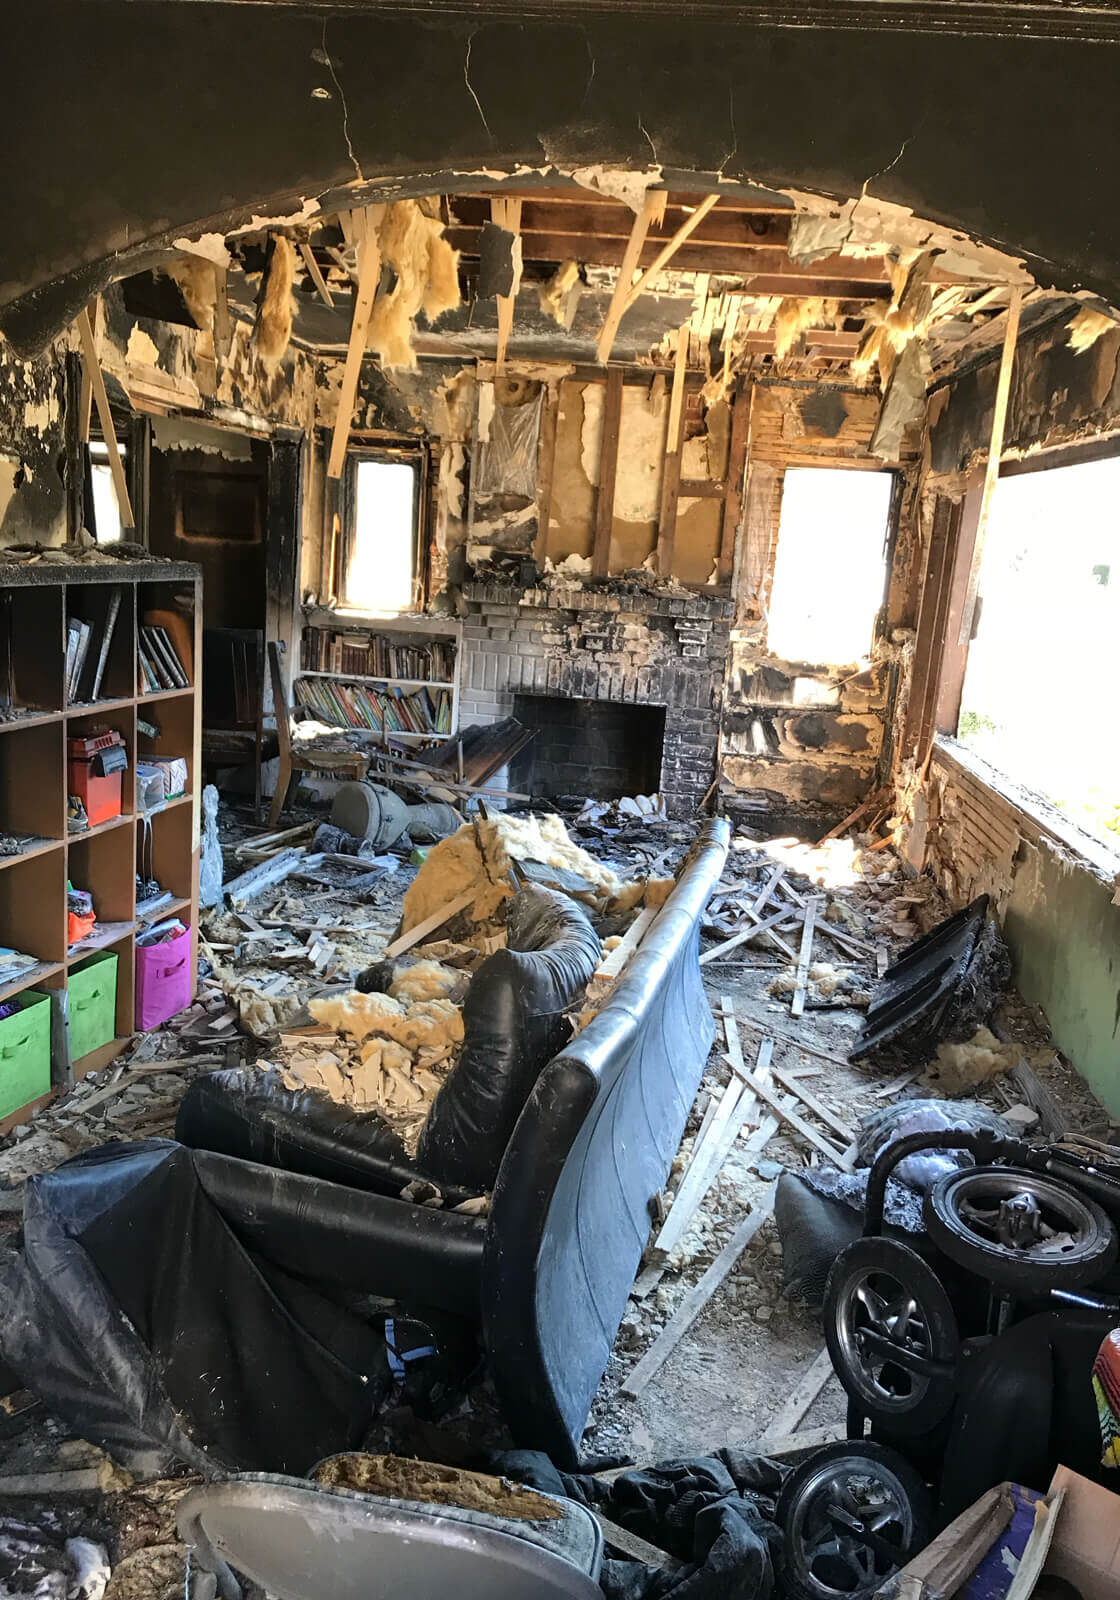 A Charred Interior Of A House, Ravaged By Fire, With Blackened Walls, Melted Furniture, And Debris Scattered Across The Floor